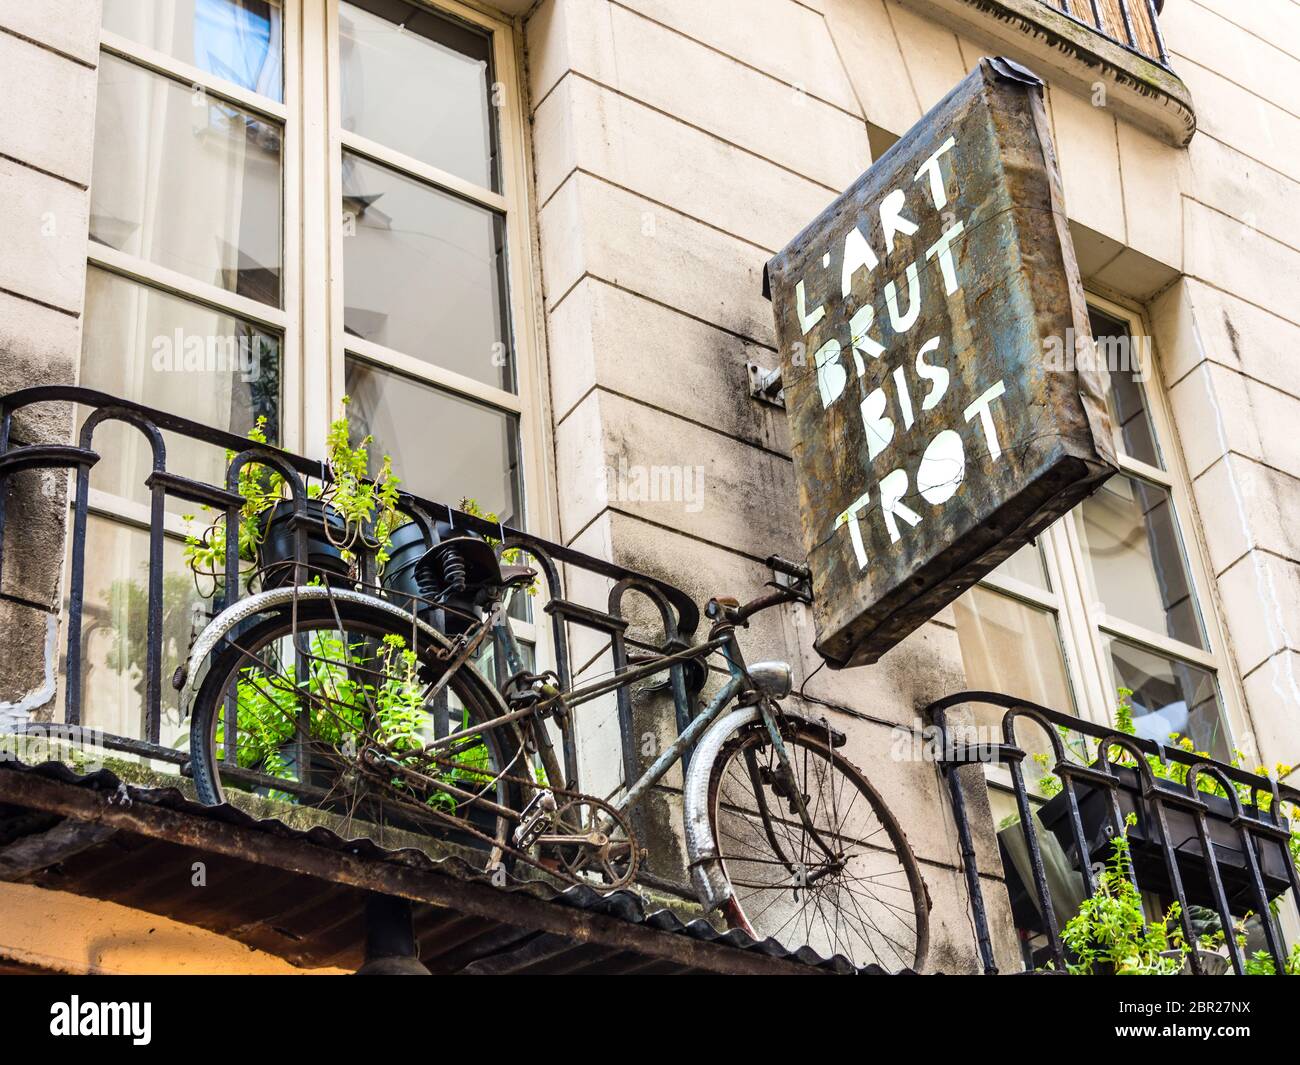 Bicycle and sign at "L'Art Brut Bistrot" Paris, France. Stock Photo